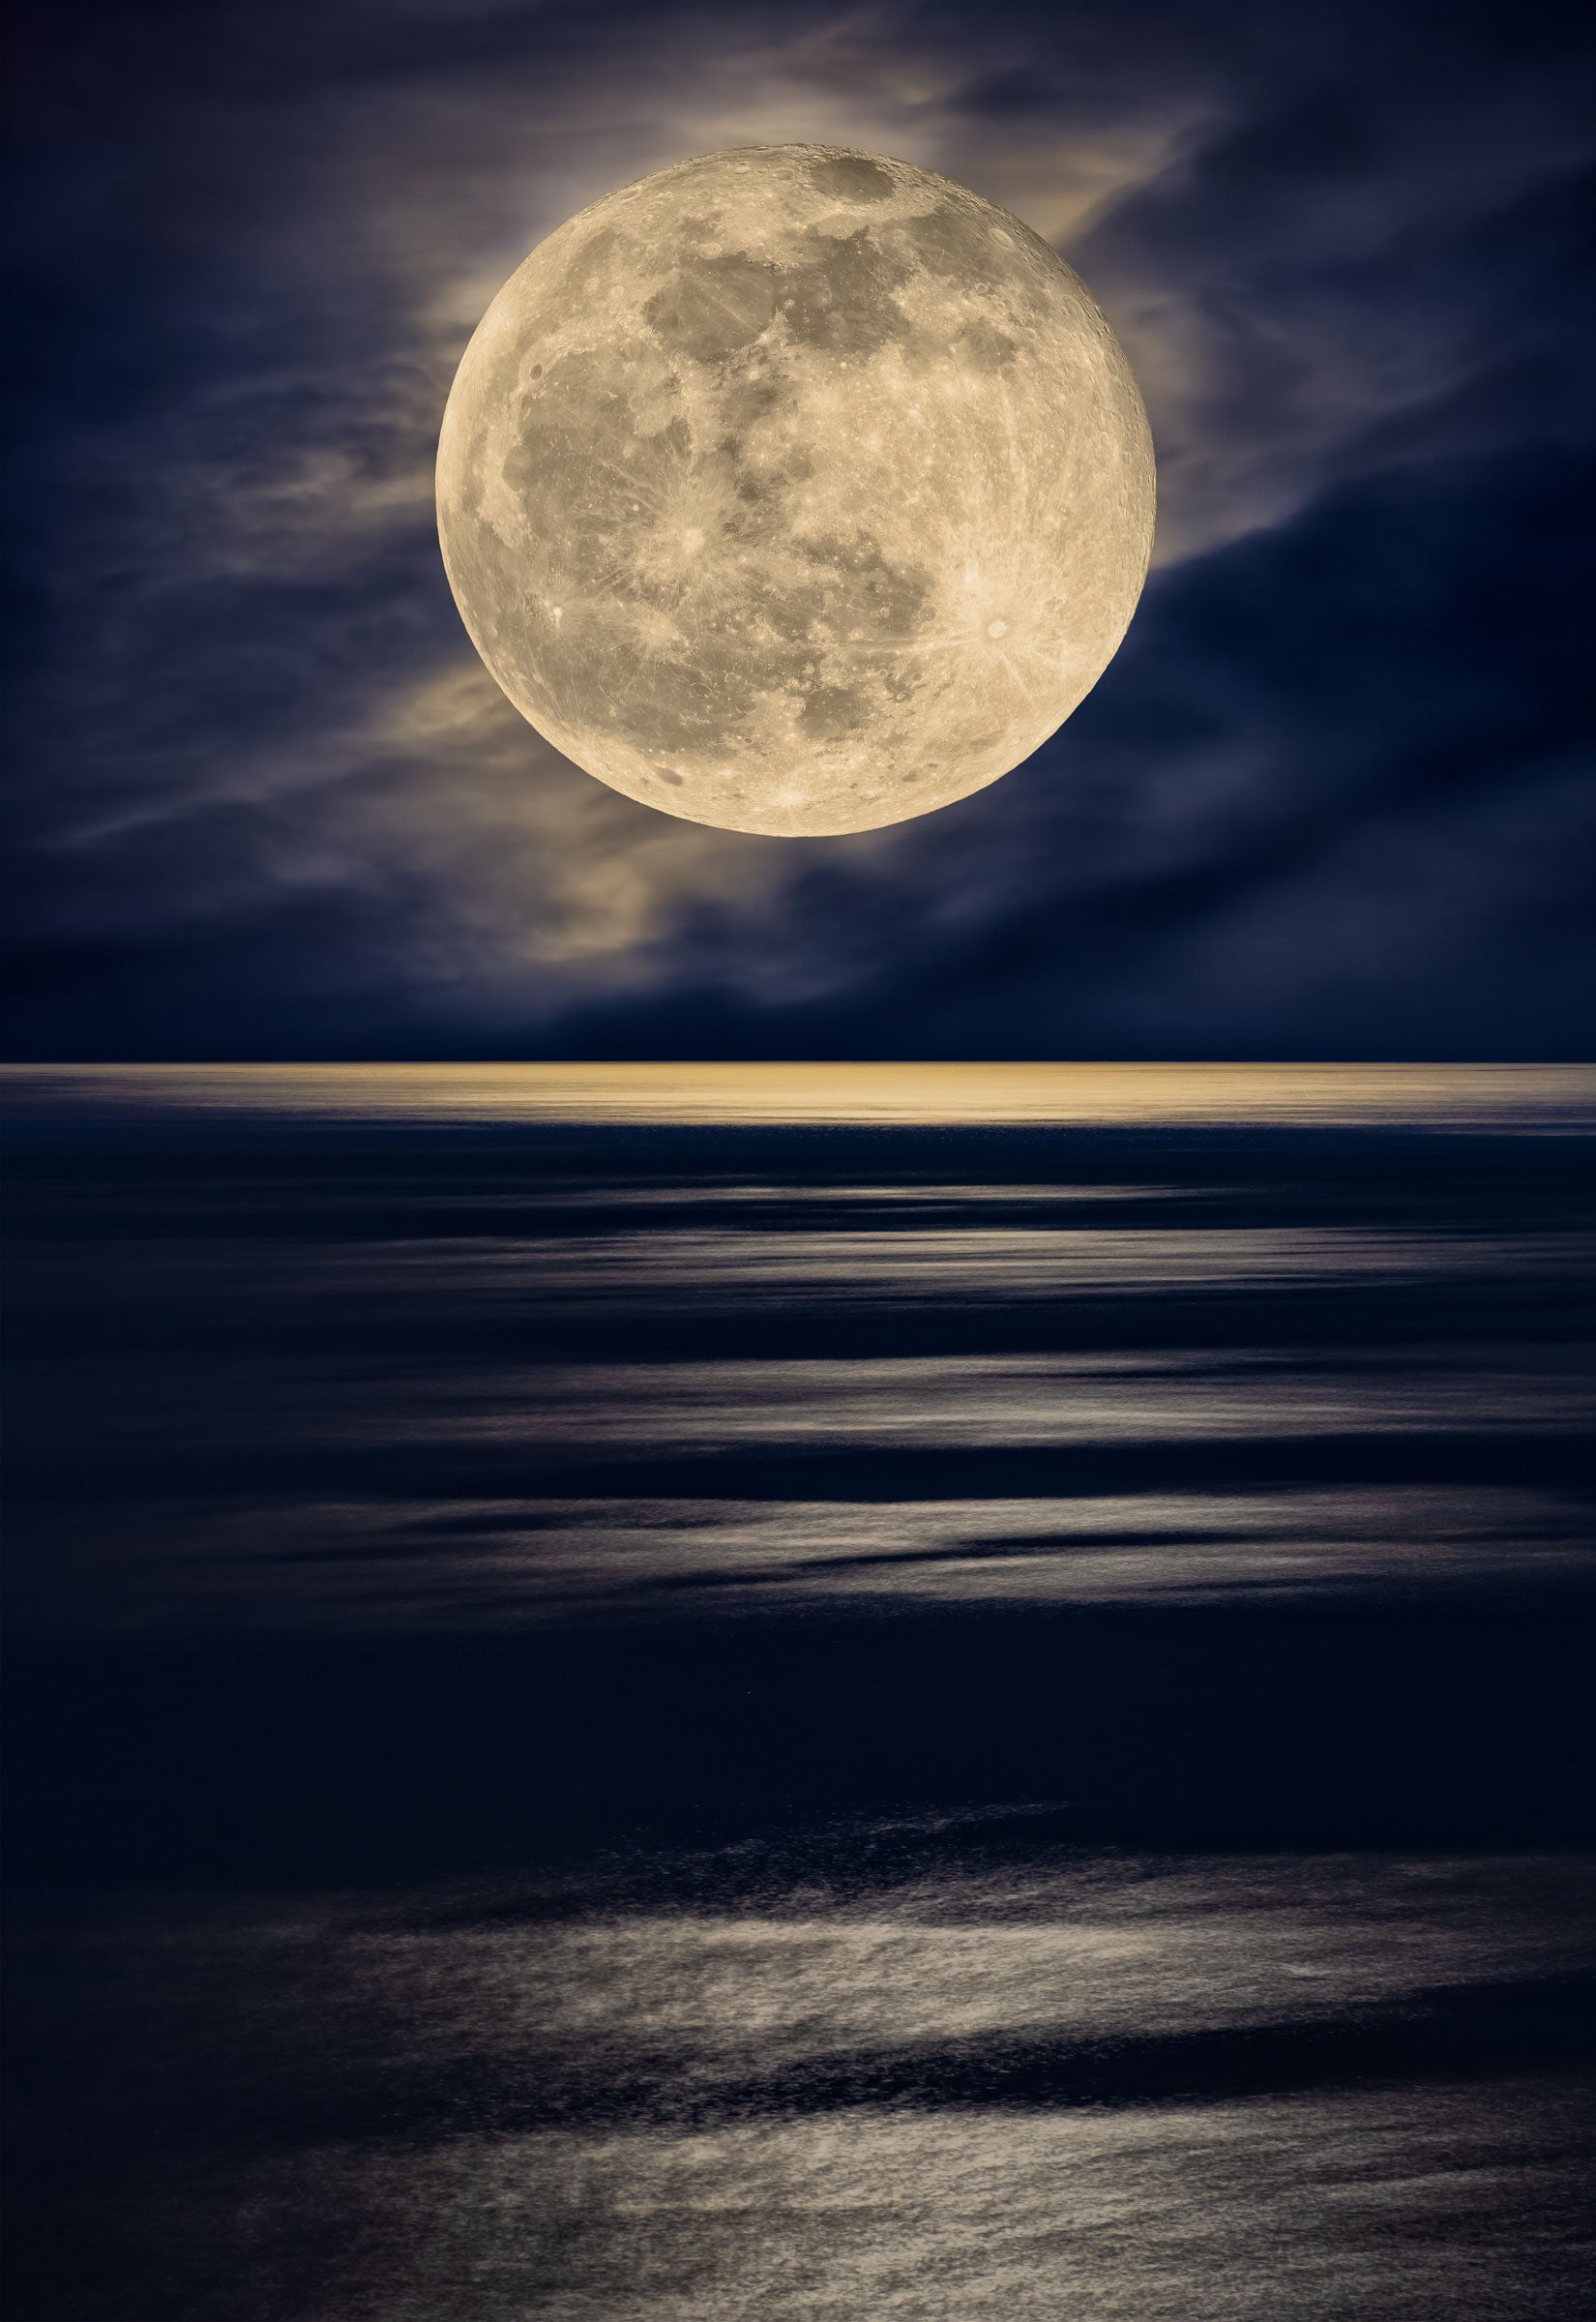 Photograph of the full moon shining off the the ocean from the coast of Ibiza, Spain by Peter Lik.